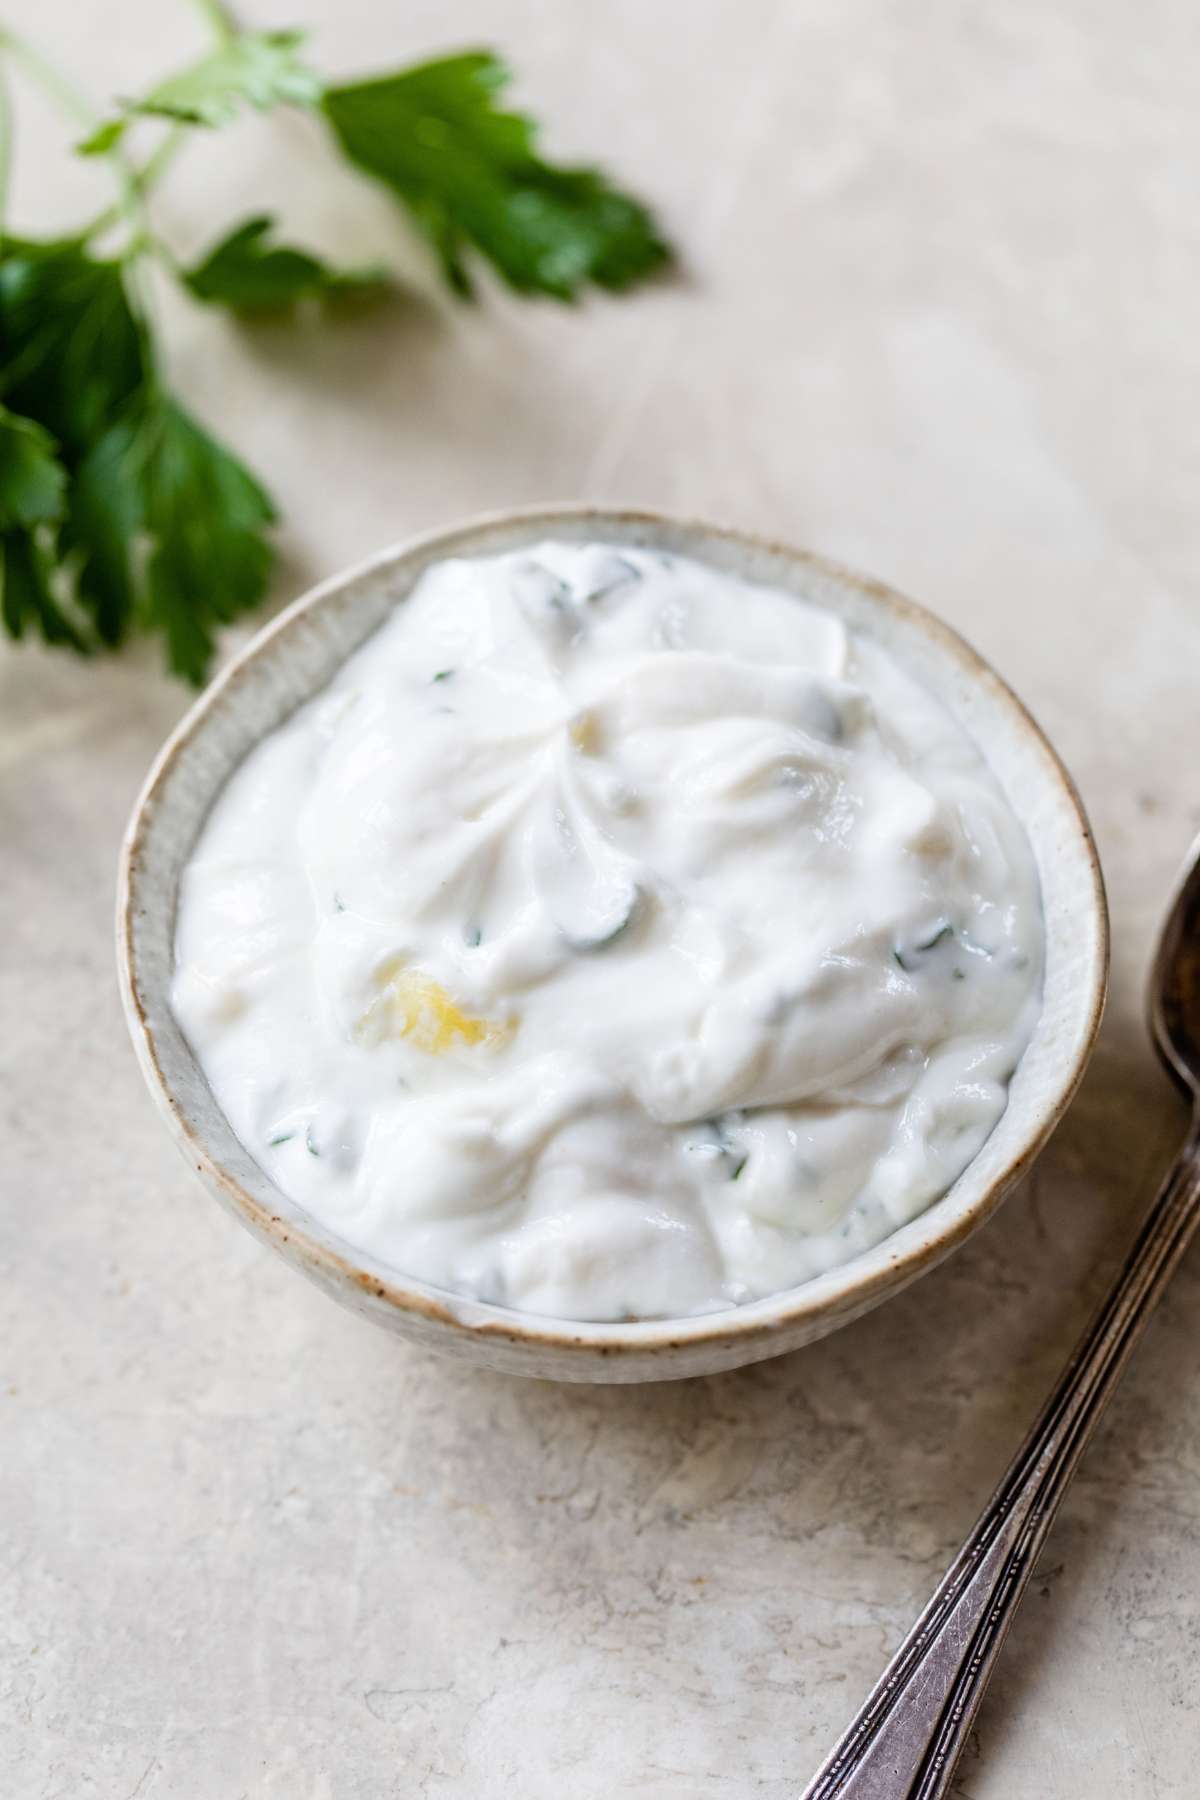 Bowl of creamy white dipping sauce.